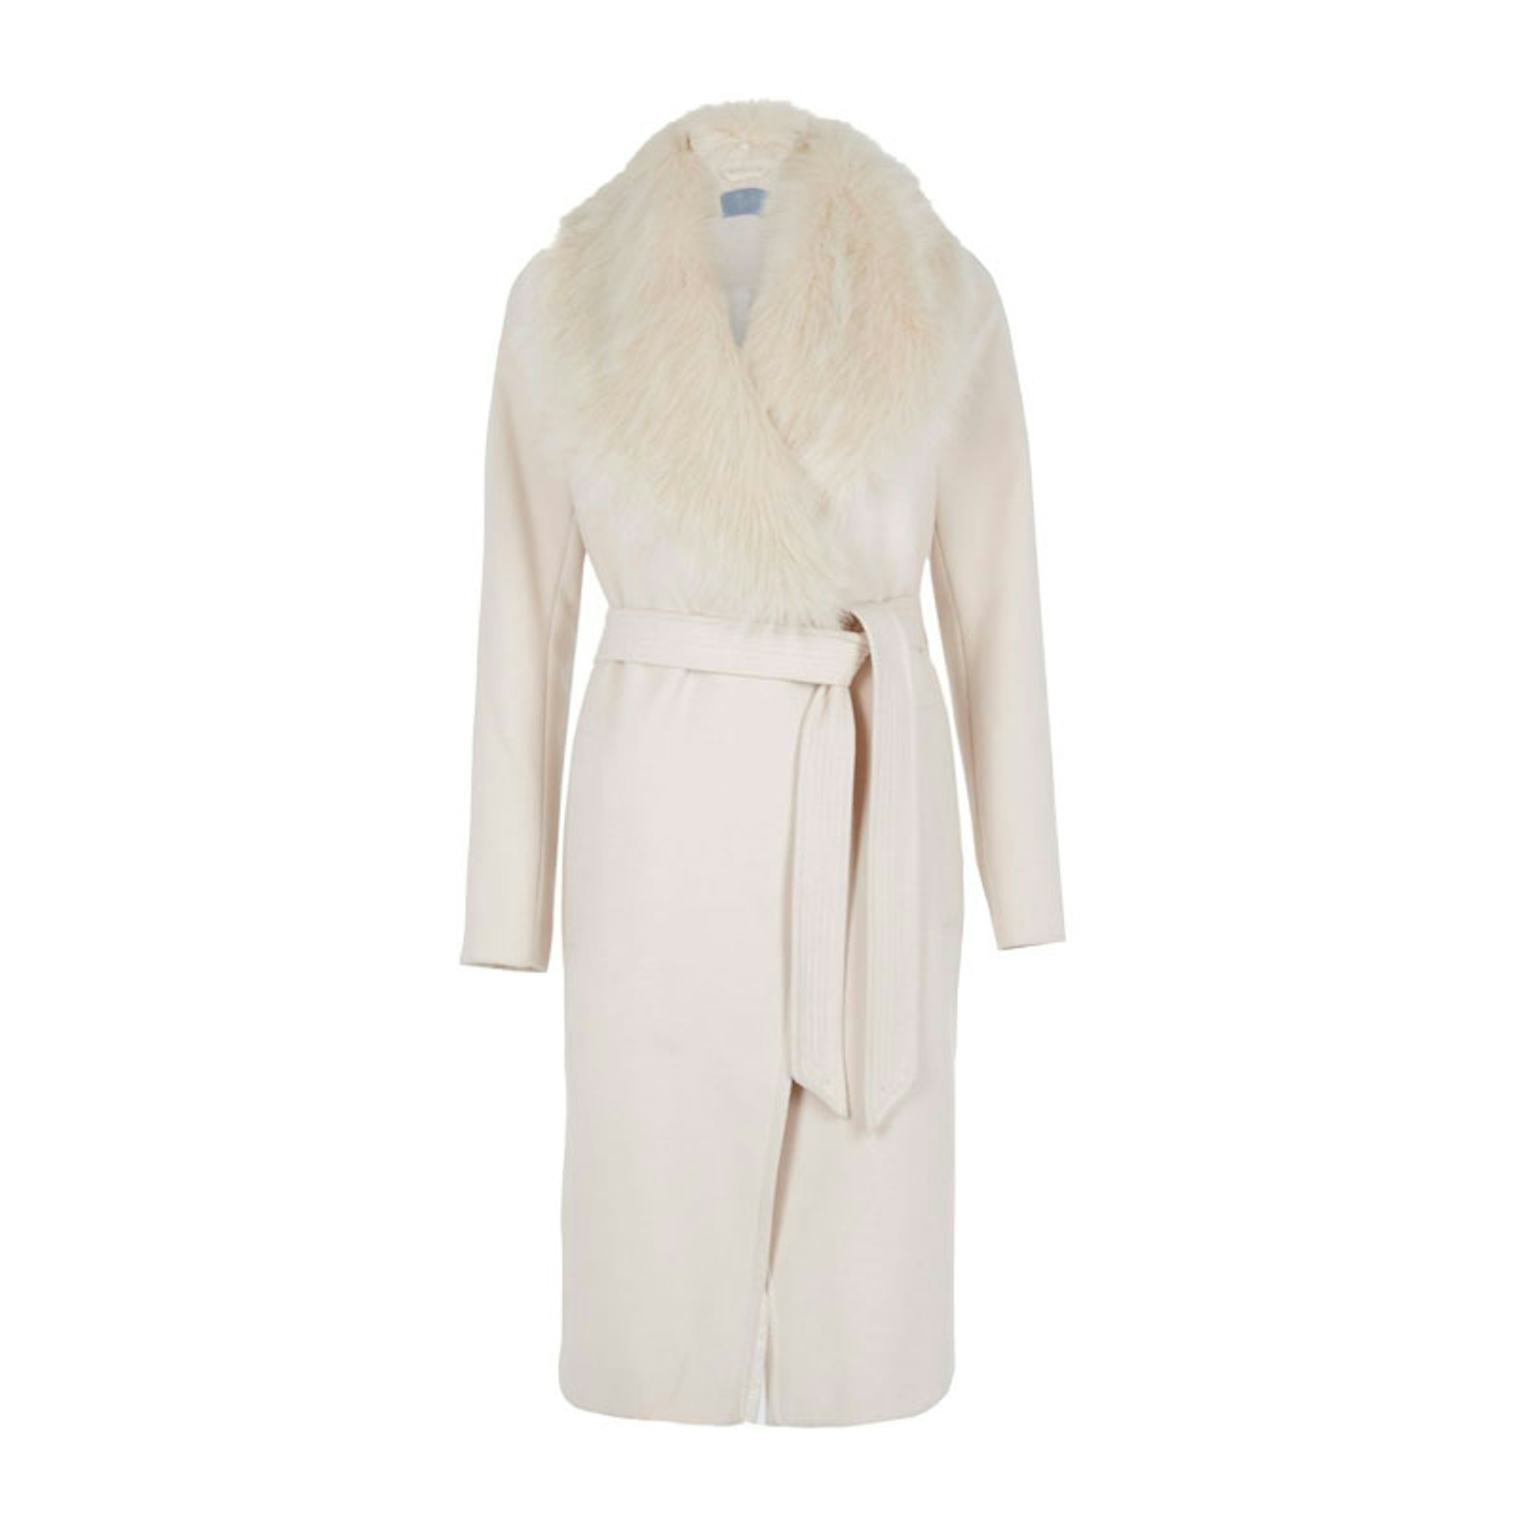 Gorgeous Evening Coats To Wear With Your Holiday Attire